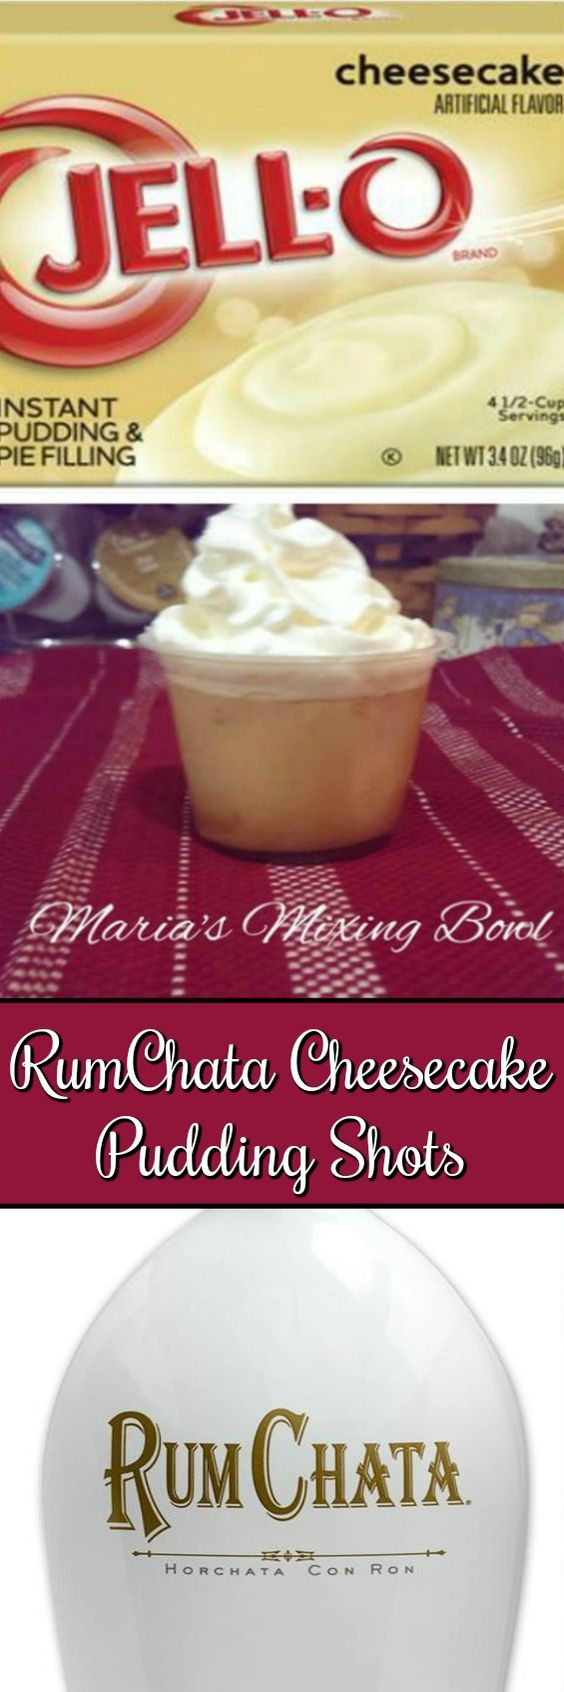 Rumchata Cheesecake Pudding Shots Maria S Mixing Bowl,Different Types Of Countertops